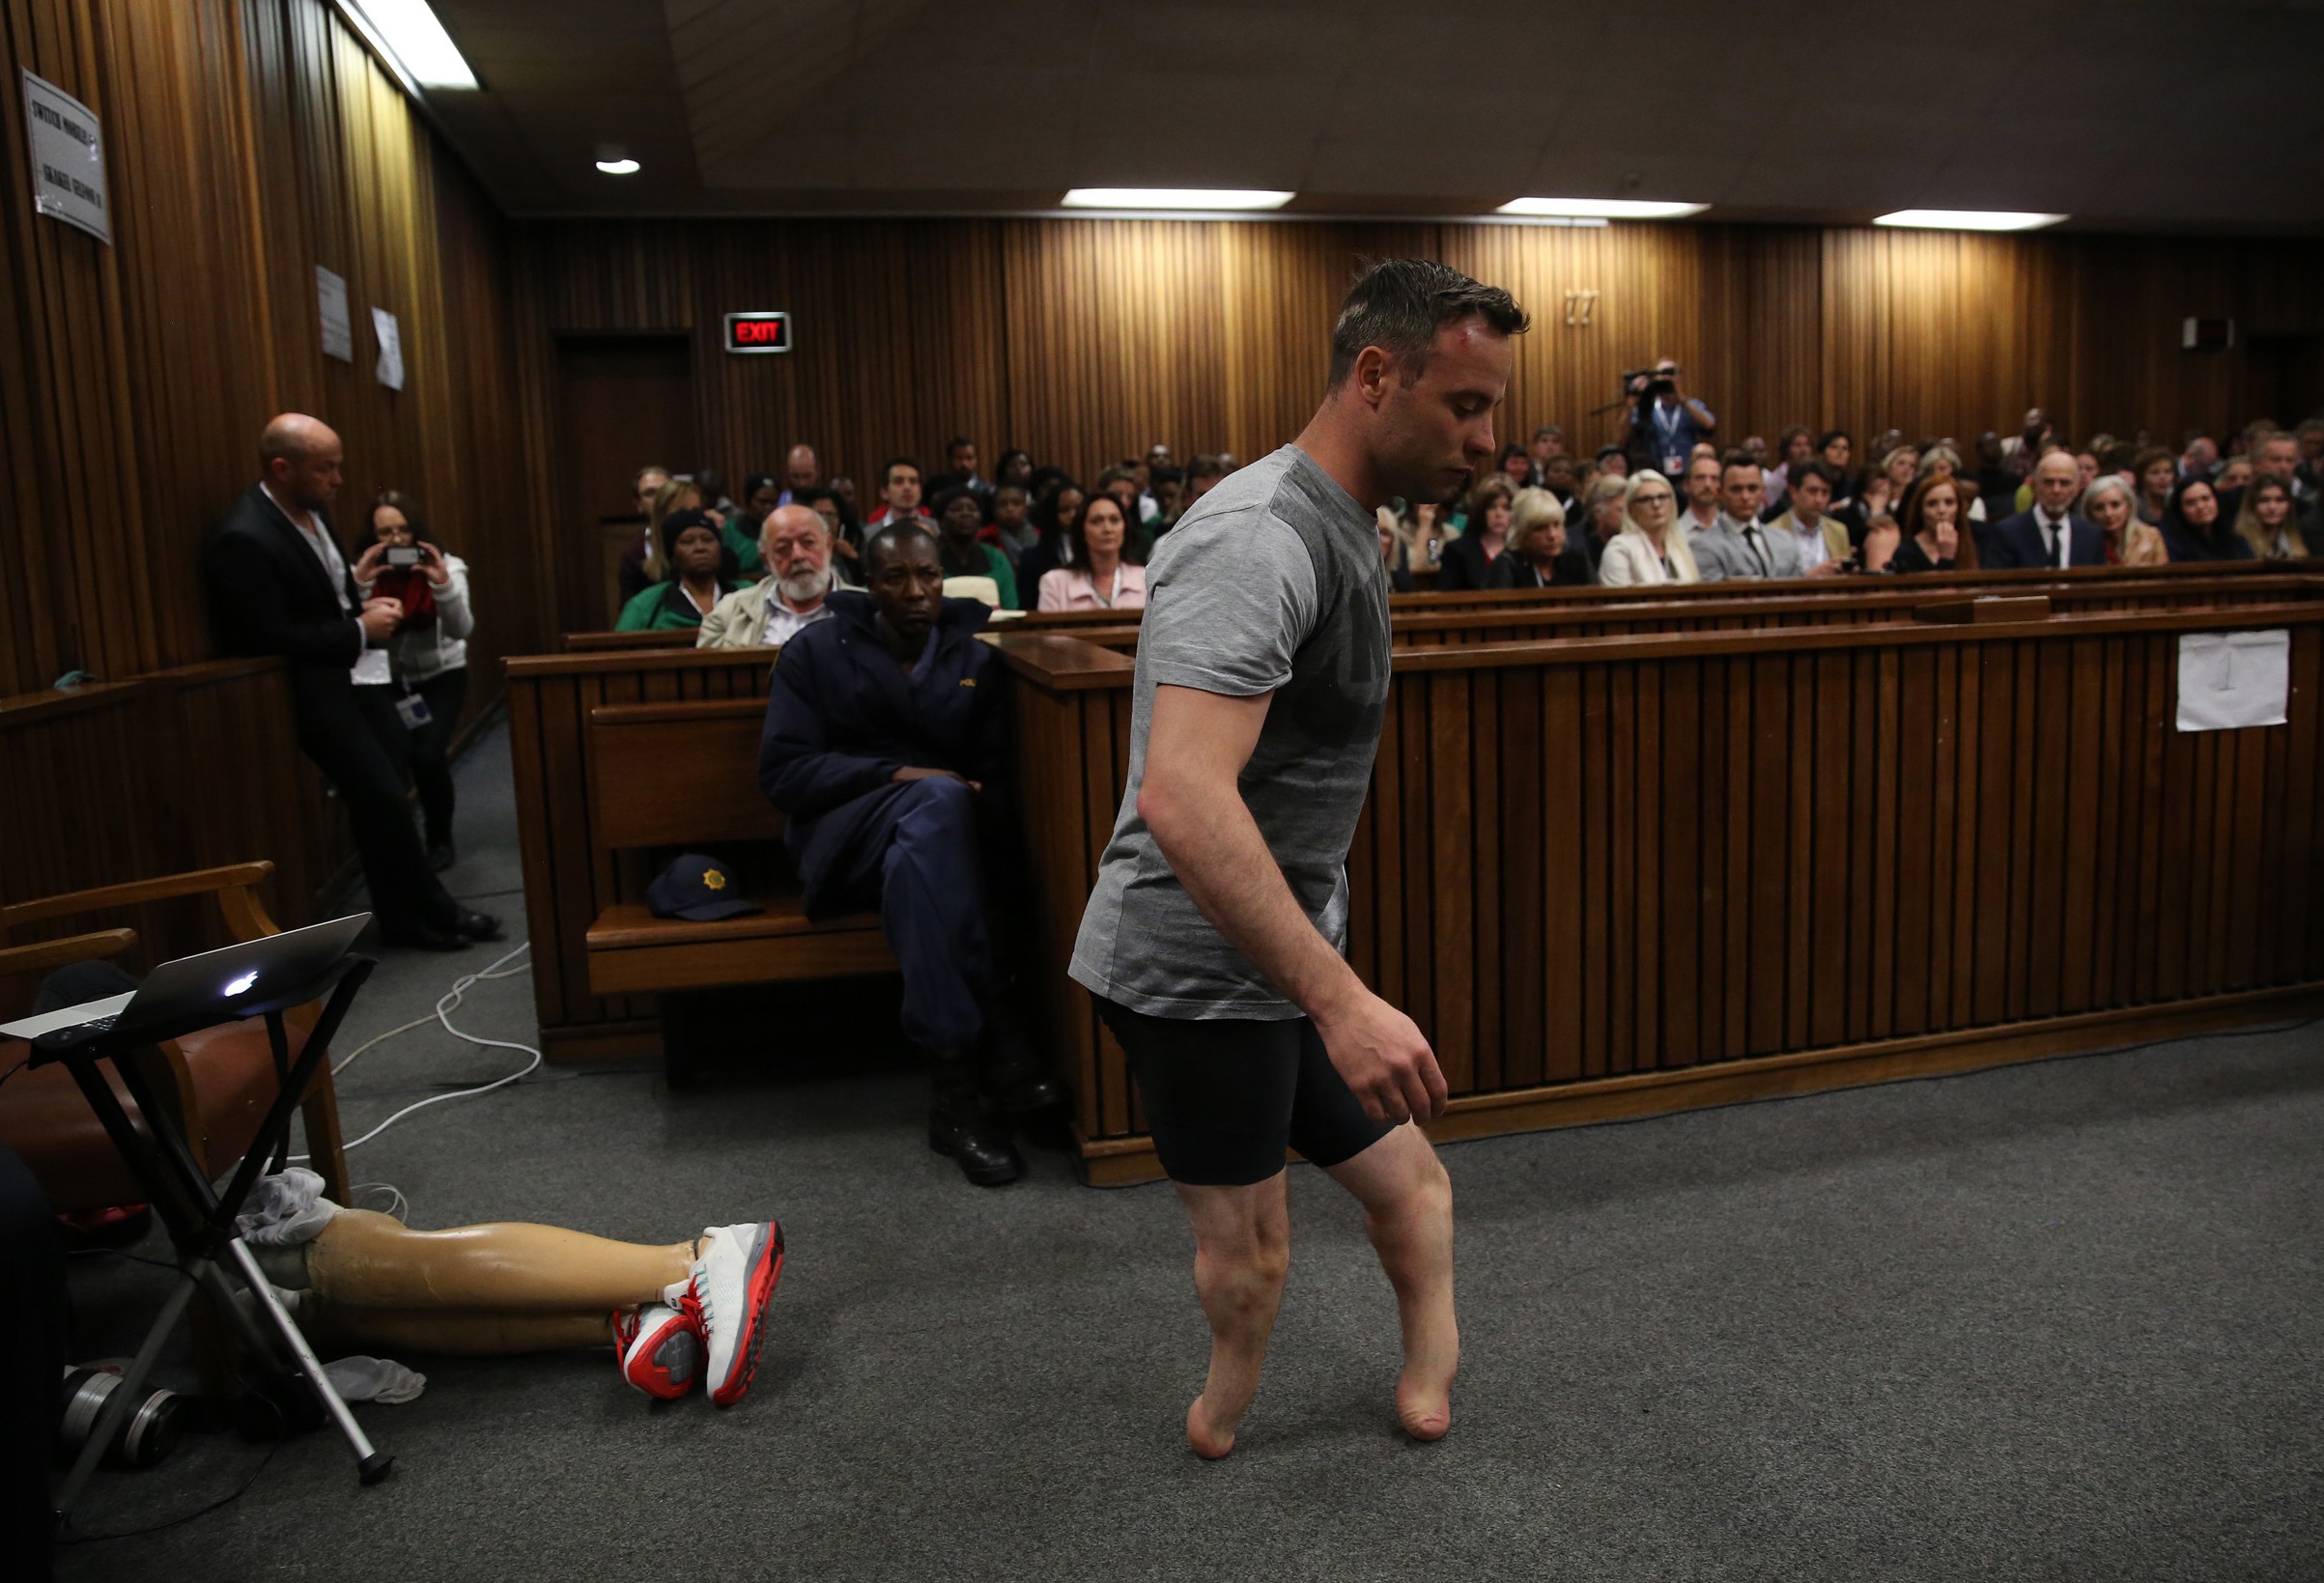 Oscar Pistorius' prosthetics lay on the floor as he walks on his stumps during argument in mitigation of sentence by his defense attorney Barry Roux in the High Court in Pretoria, South Africa, in June 2016. He has now lost his final appeal against his conviction for murdering his girlfriend, Reeva Steenkamp. Photo: Pool via AP